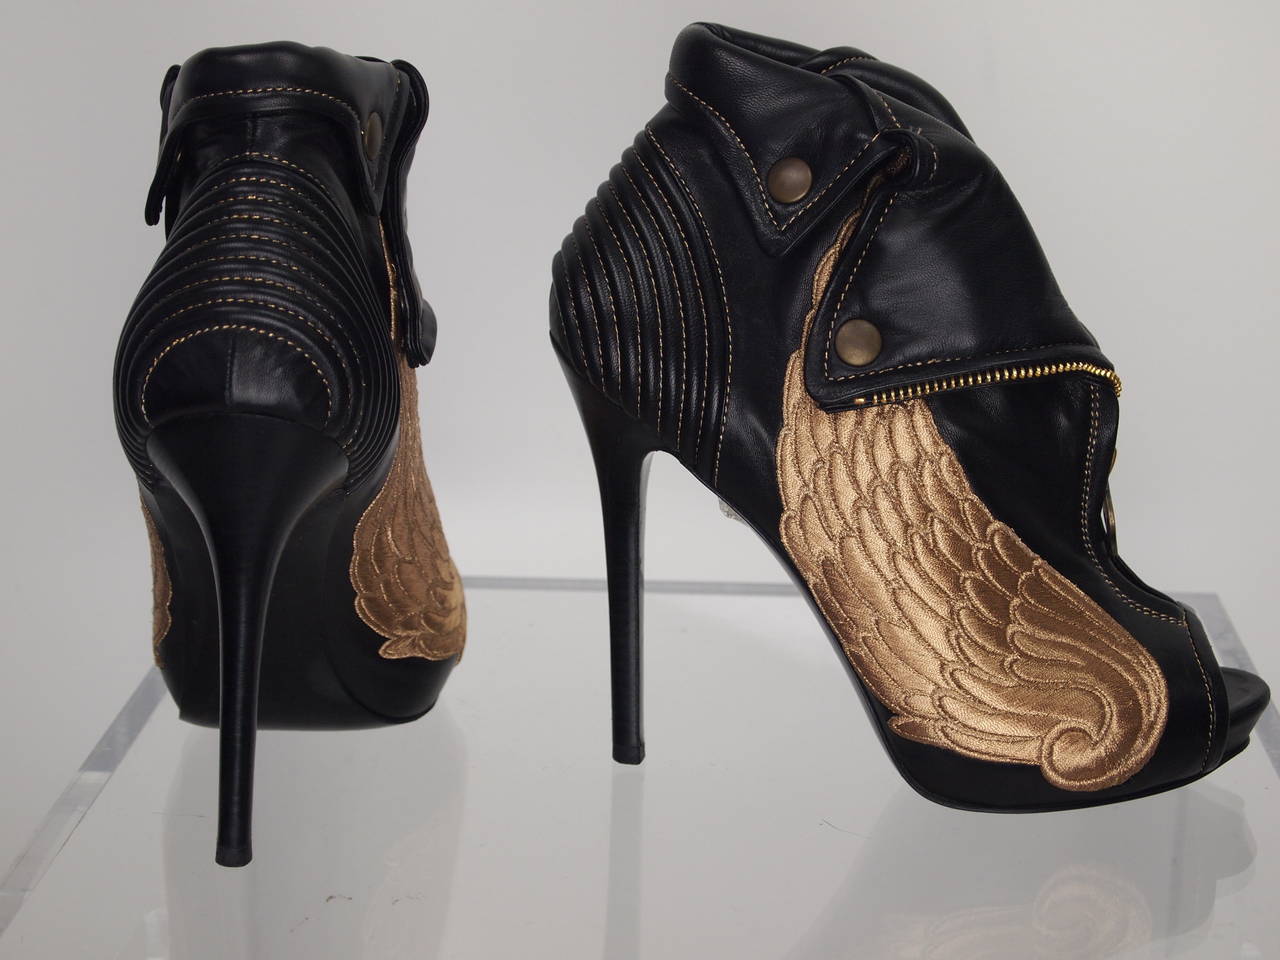 Alexander McQueen, leather peep-toe booties with ribbing at counter, zip detail at front, embroidered wings at sides and stacked heel. Includes box and dust bag.